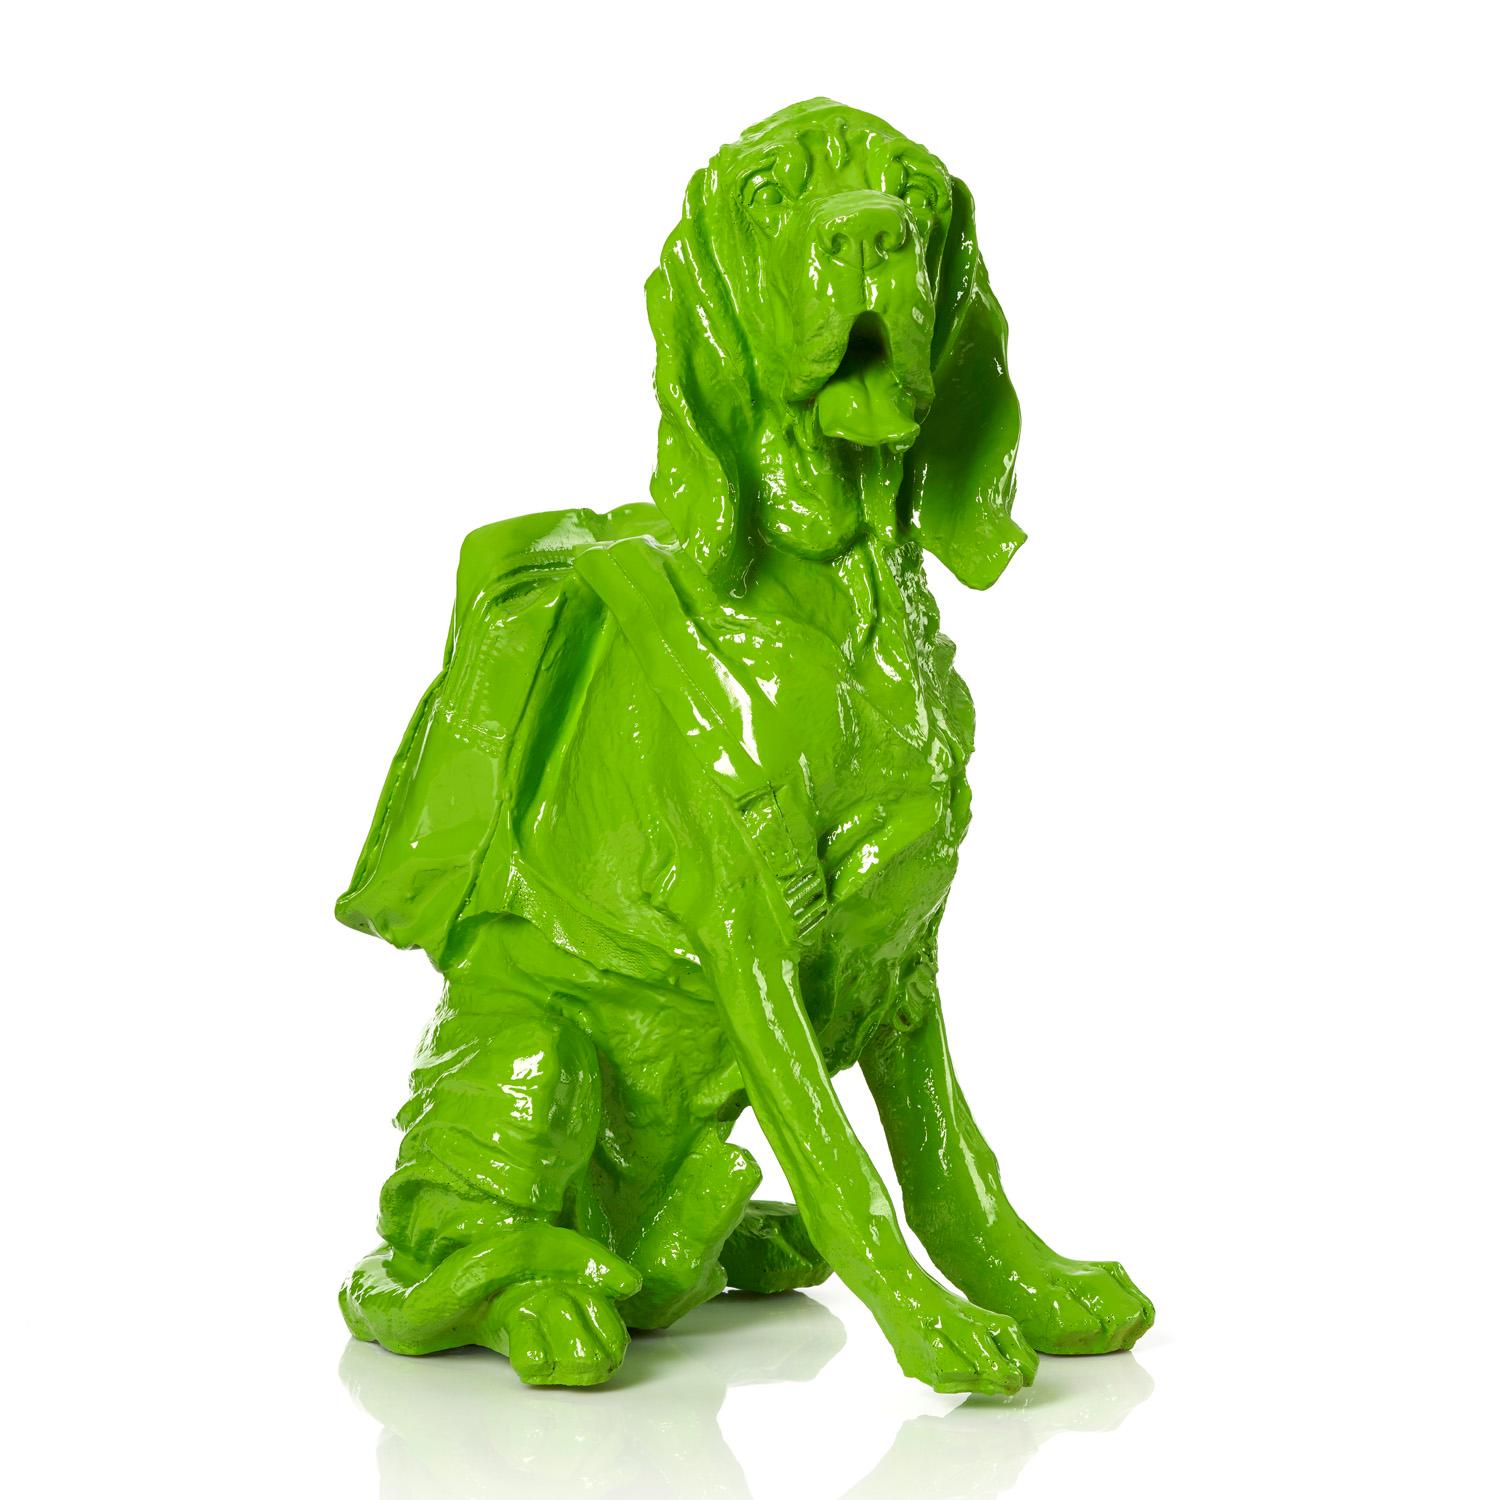 William Sweetlove Figurative Sculpture - Cloned blue Bloodhound with Backpack (green)